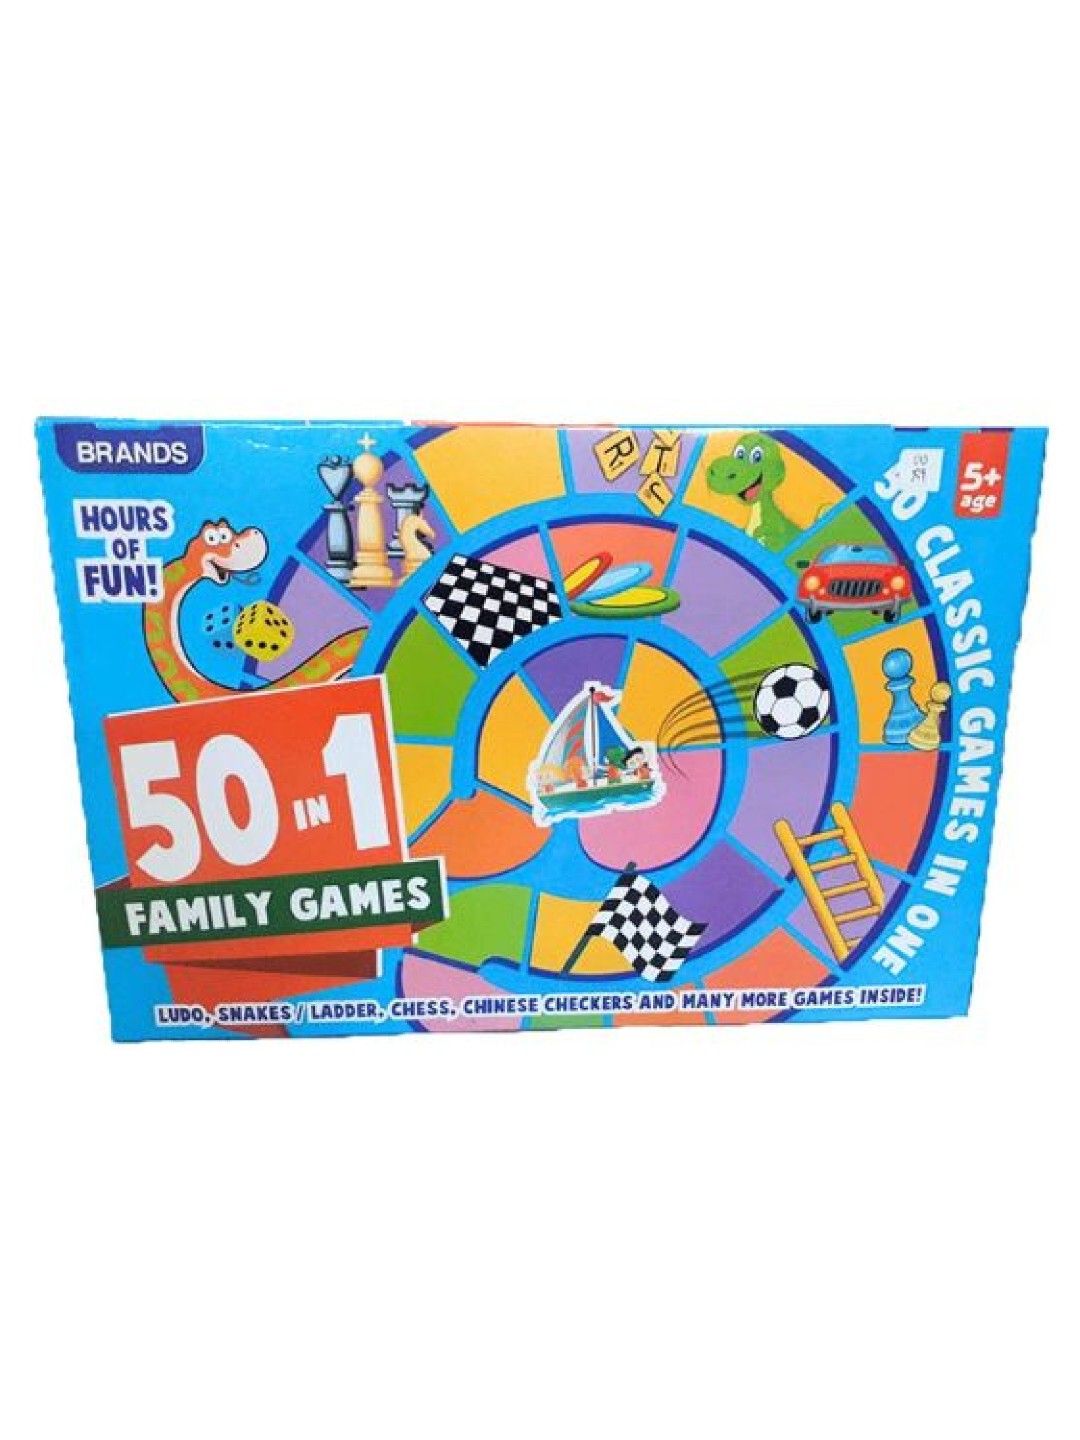 Playcraft 50 in 1 Family Games (No Color- Image 1)